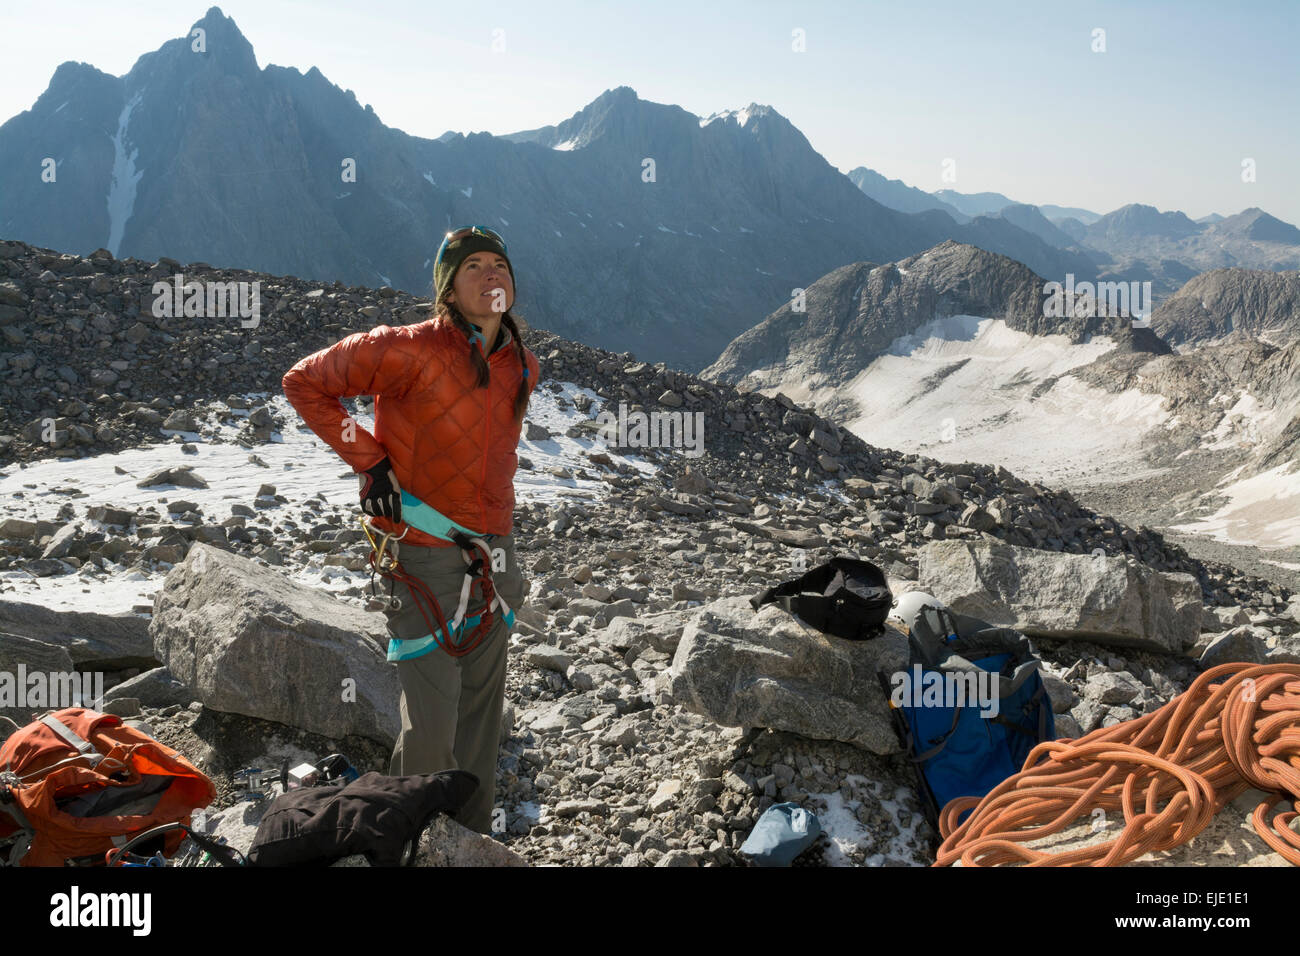 A woman rock climber in Titcomb Basin, Wind River Range, Pinedale, Wyoming. Stock Photo